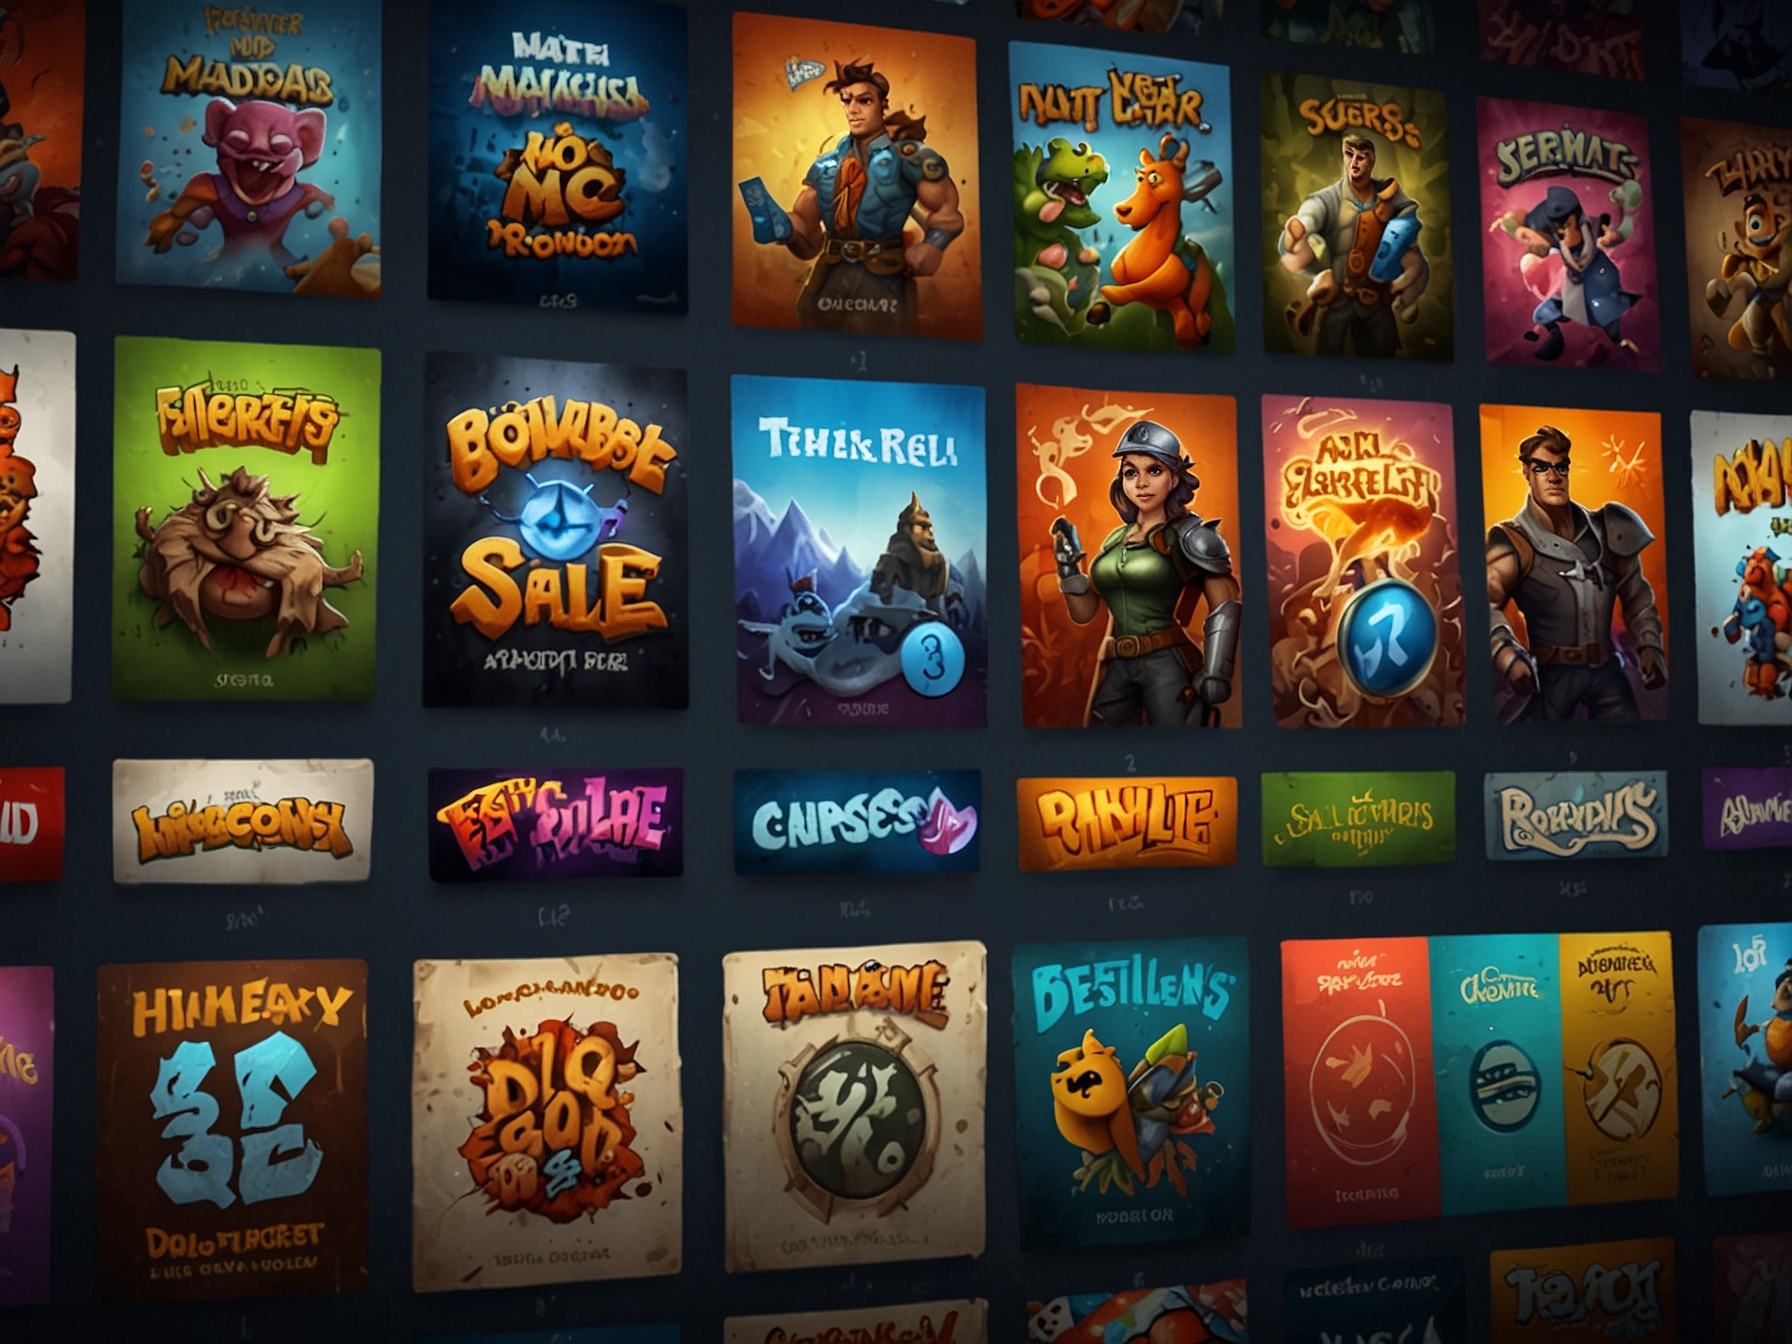 An image showcasing a variety of discounted Mac App Store game titles, each with its original and slashed sale prices prominently displayed, indicating their exceptional value.